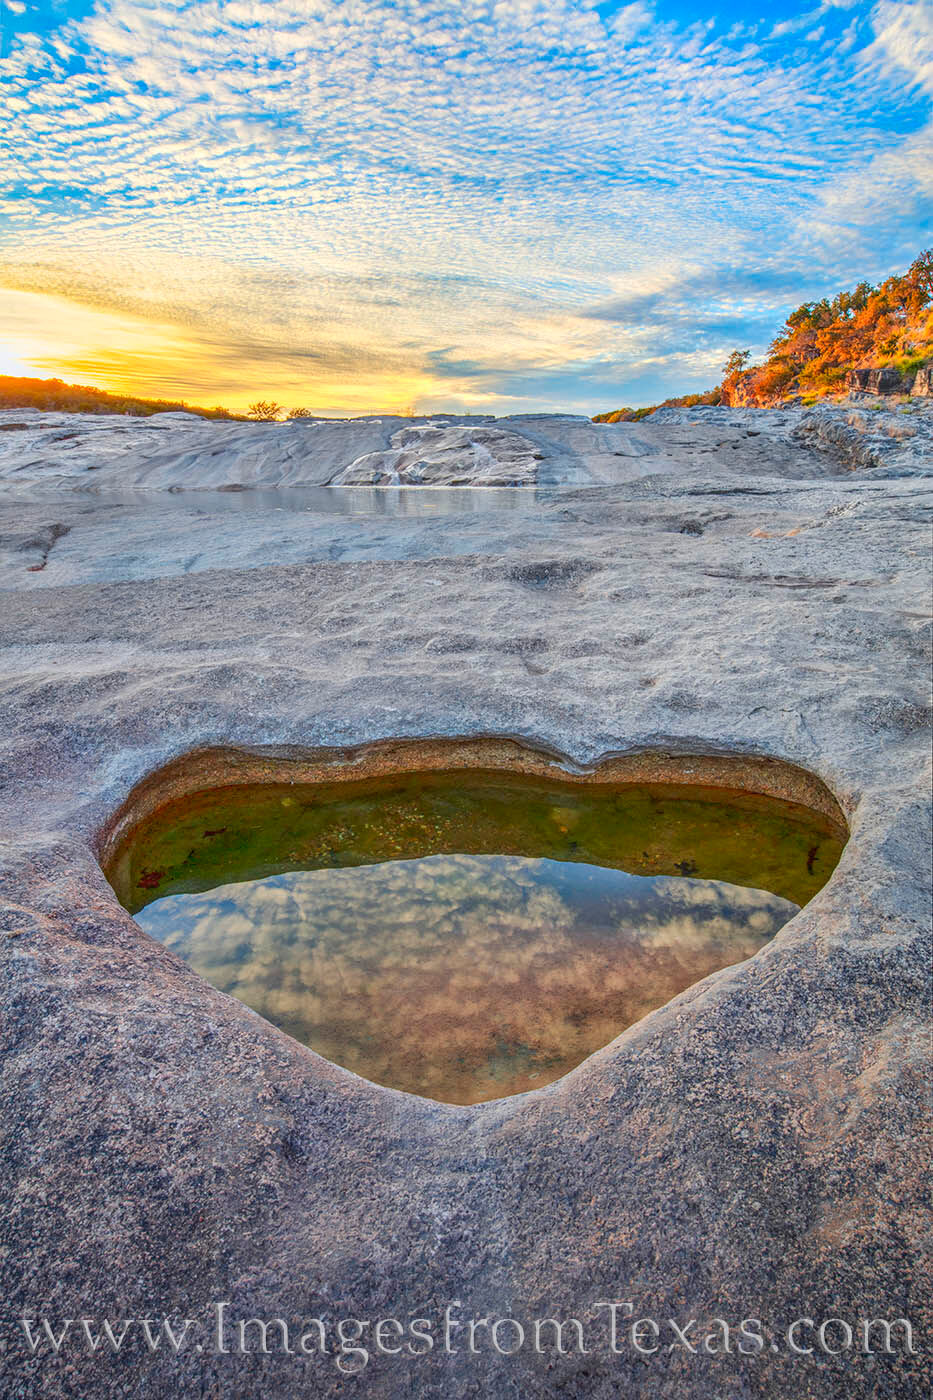 While exploring one of my favorite areas in the Hill Country one evening, I came across this perfect rock pool along the Pedernales...